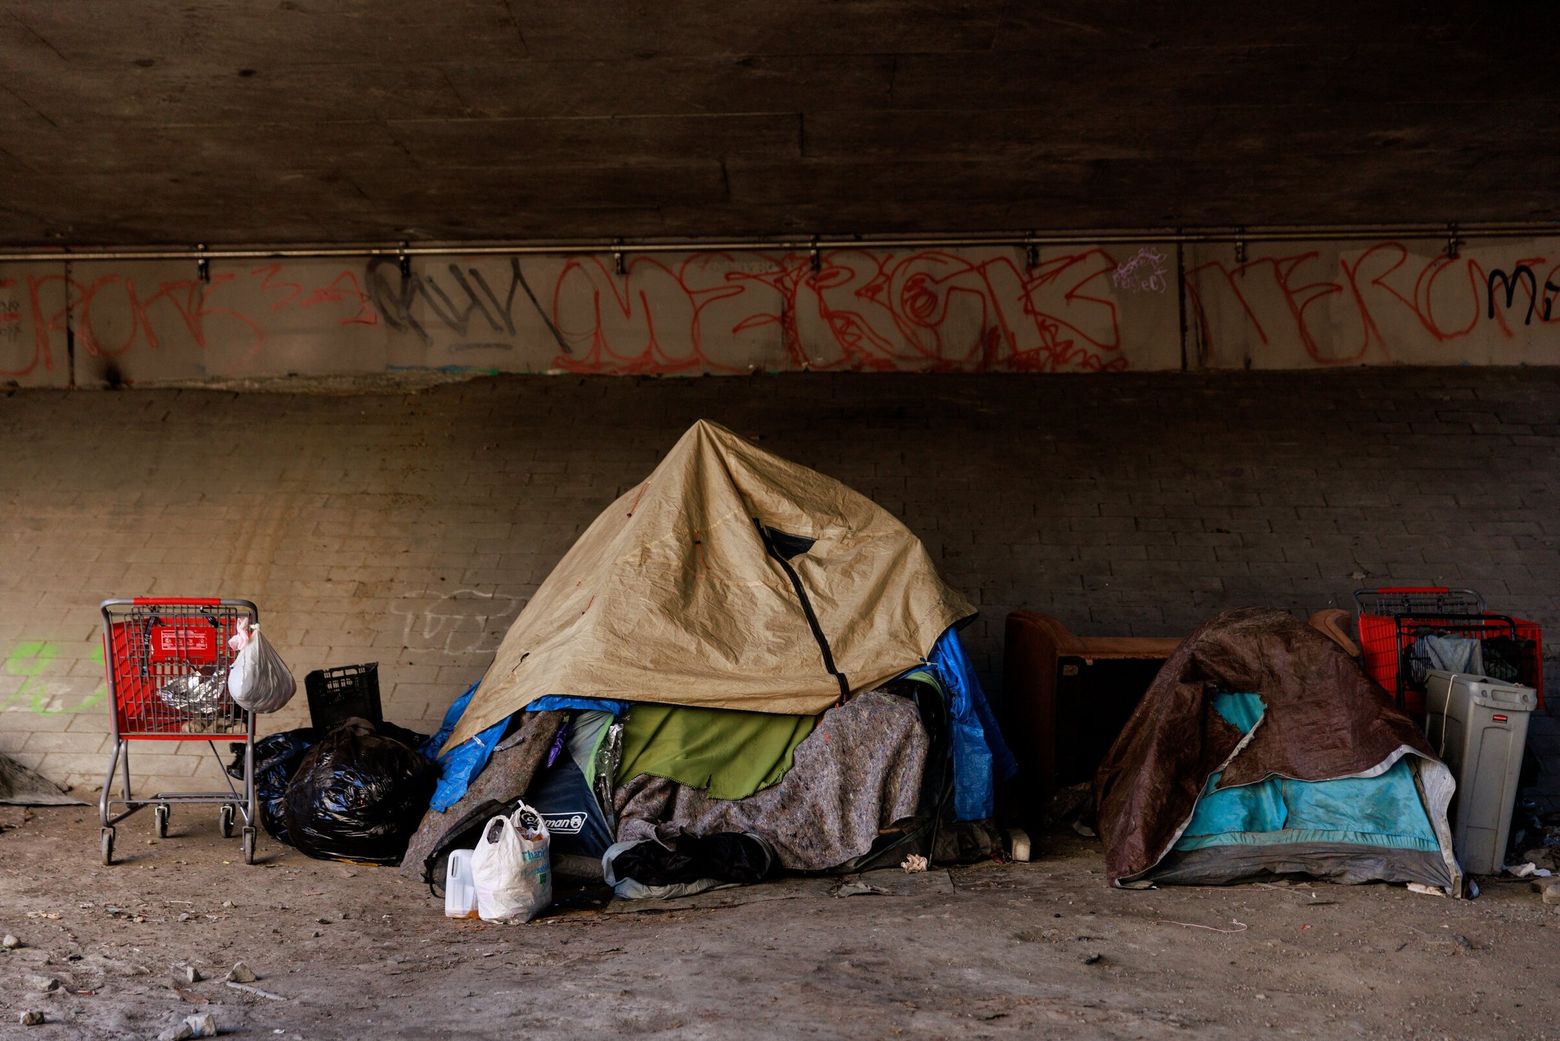 Plan to reduce homelessness in downtown Seattle picks up after slow start |  The Seattle Times